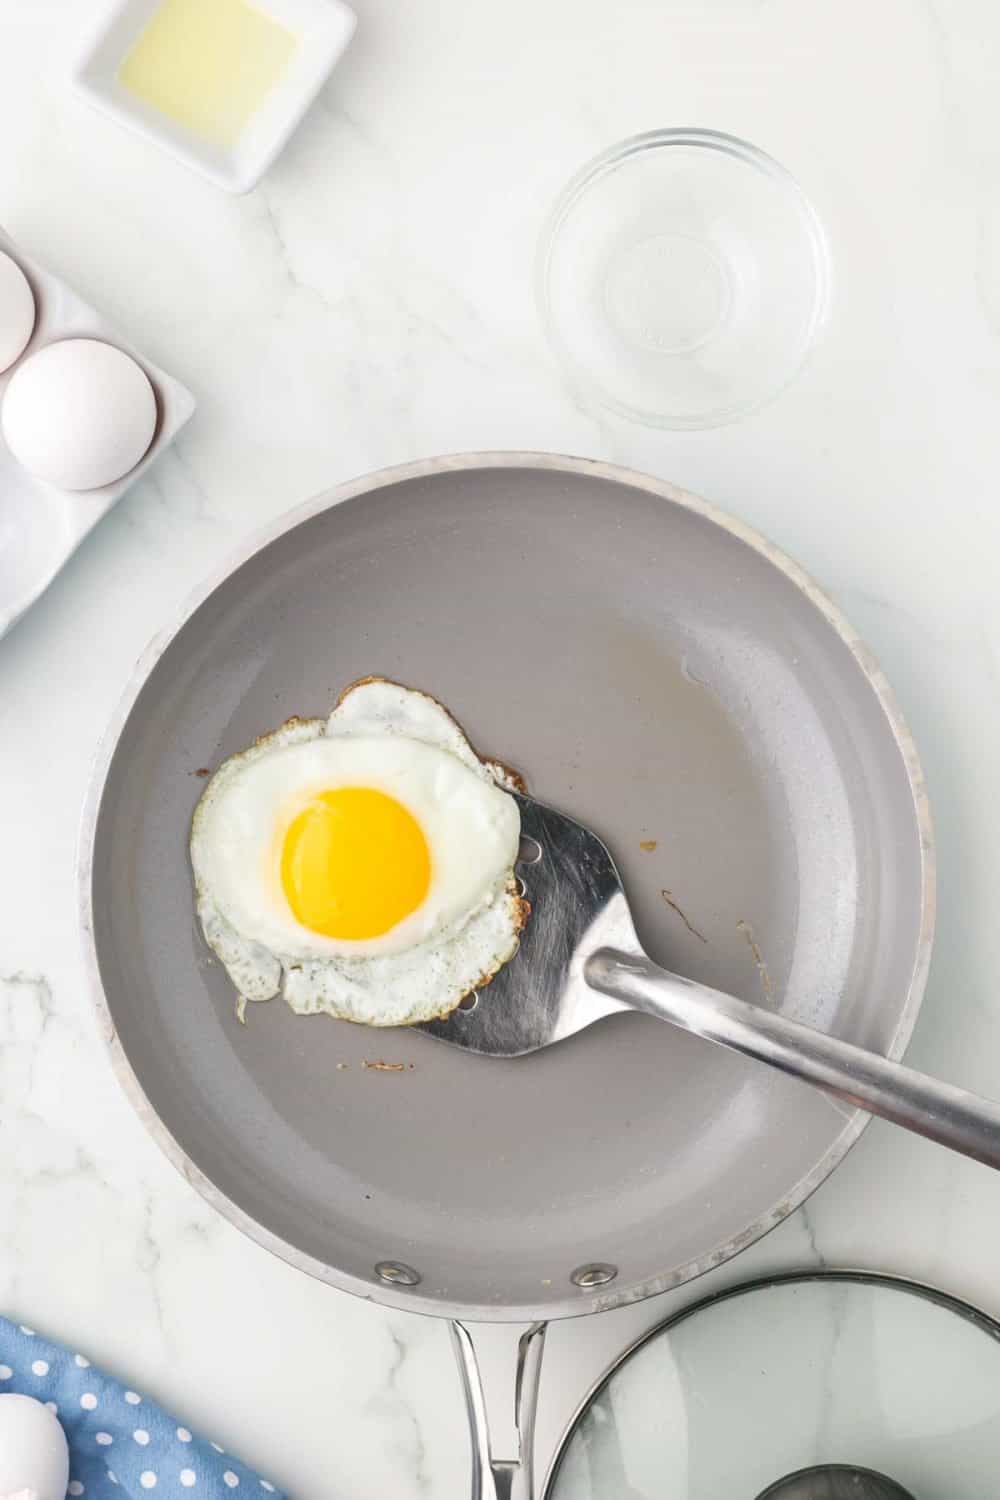 sautéed pan with an over easy egg cooking in it